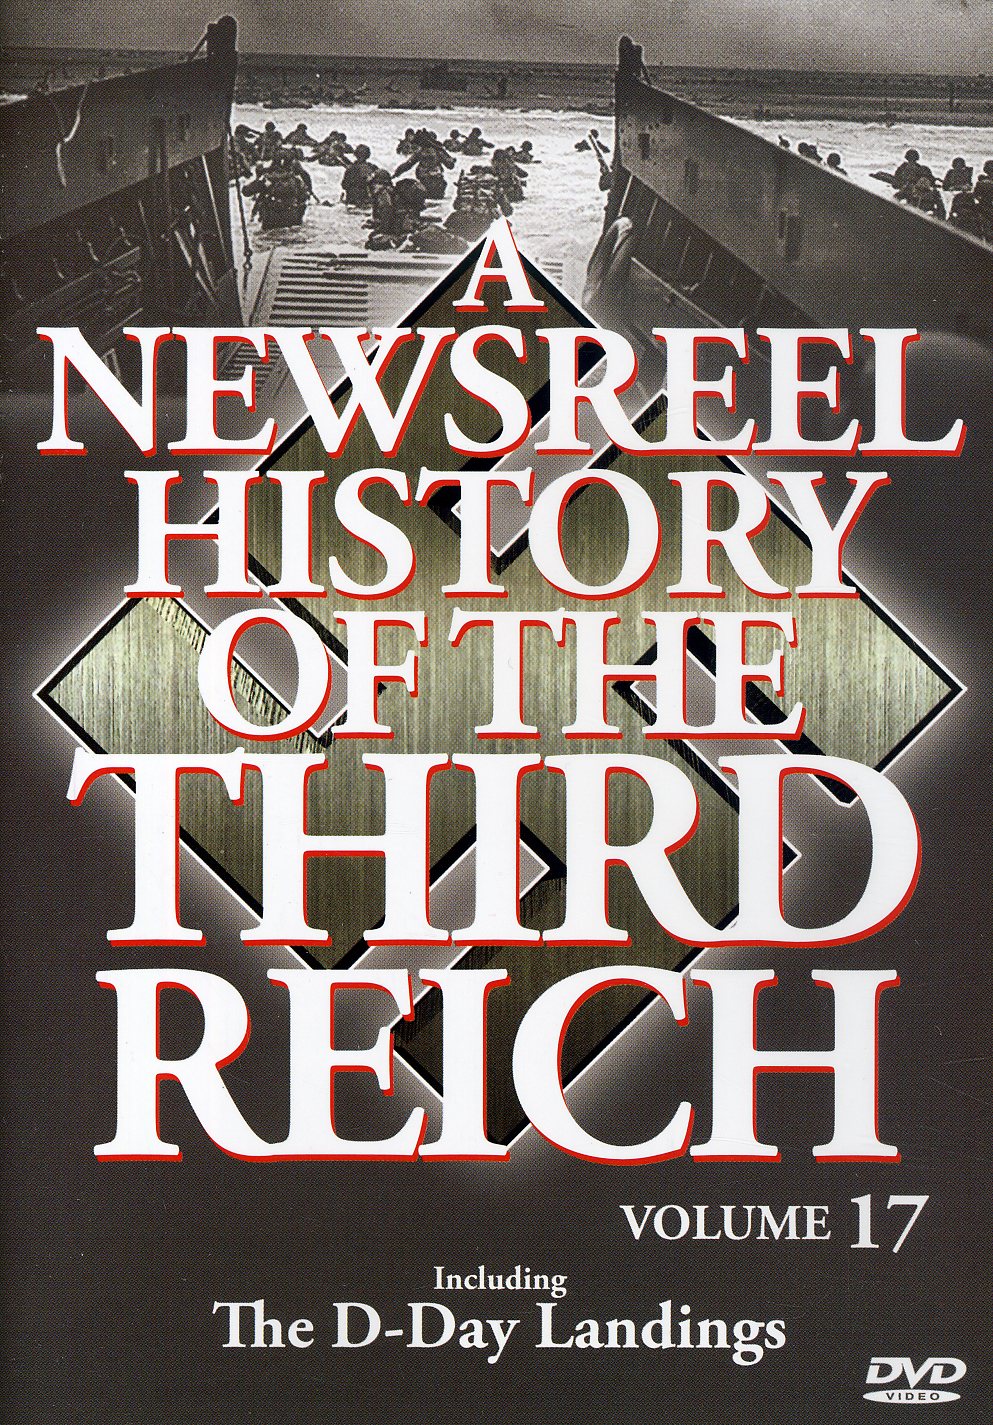 NEWSREEL HISTORY OF THE THIRD REICH 17